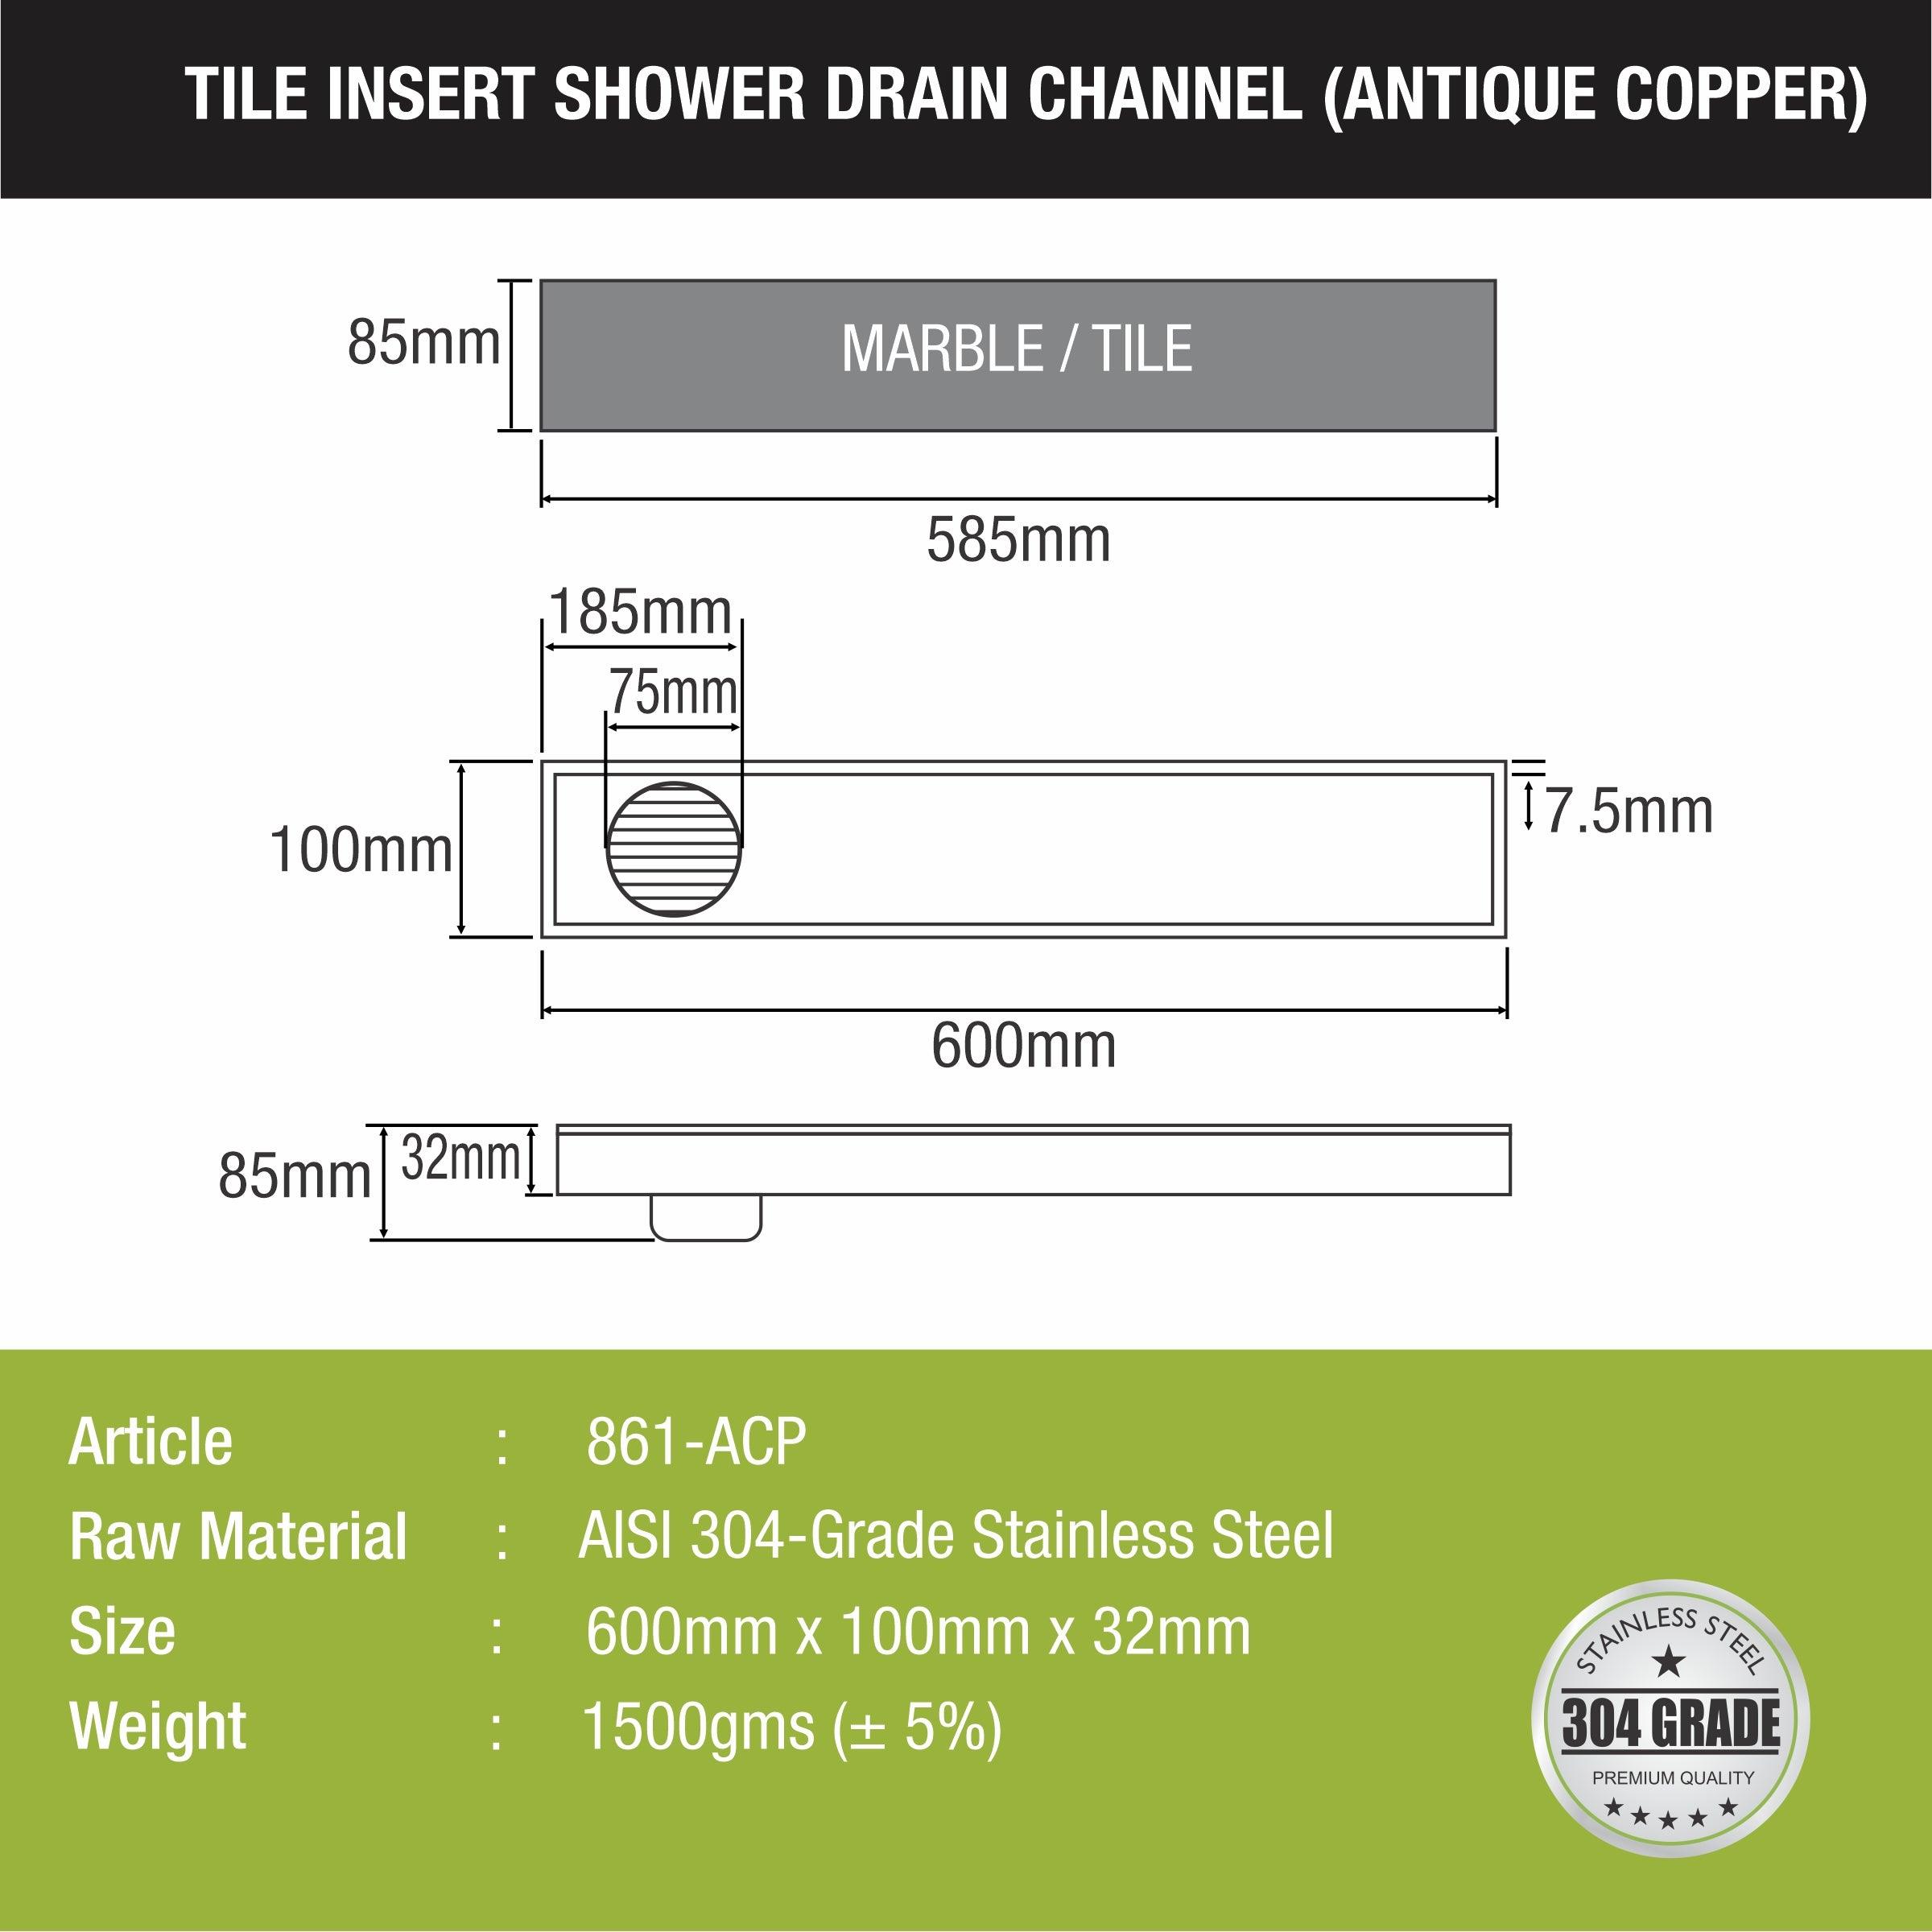 Tile Insert Shower Drain Channel - Antique Copper (24 x 4 Inches) sizes and dimensions